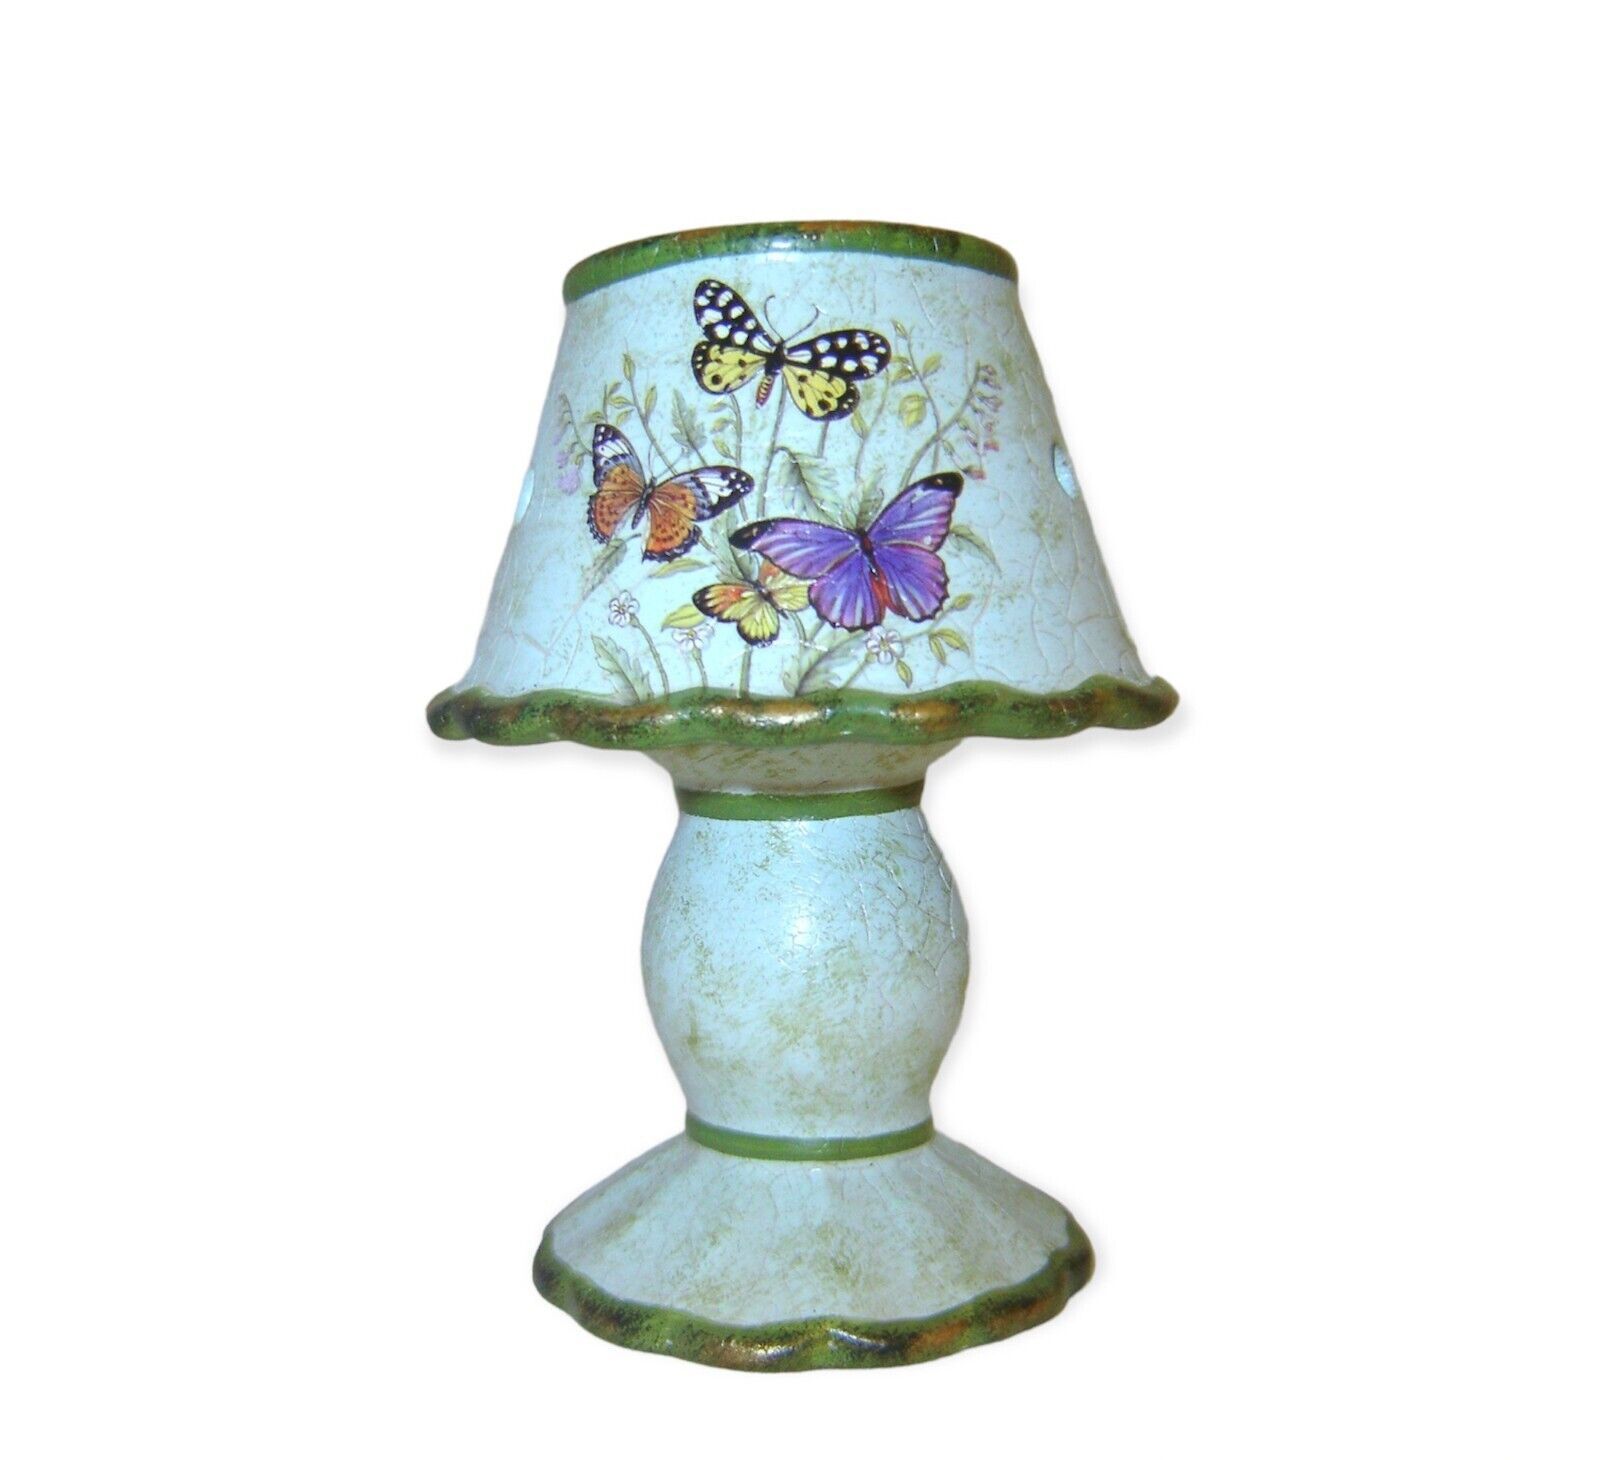 Butterfly Tealight Candle Holder Turquoise Blue Lamp Shade 6.5" High Ceramic - $29.69